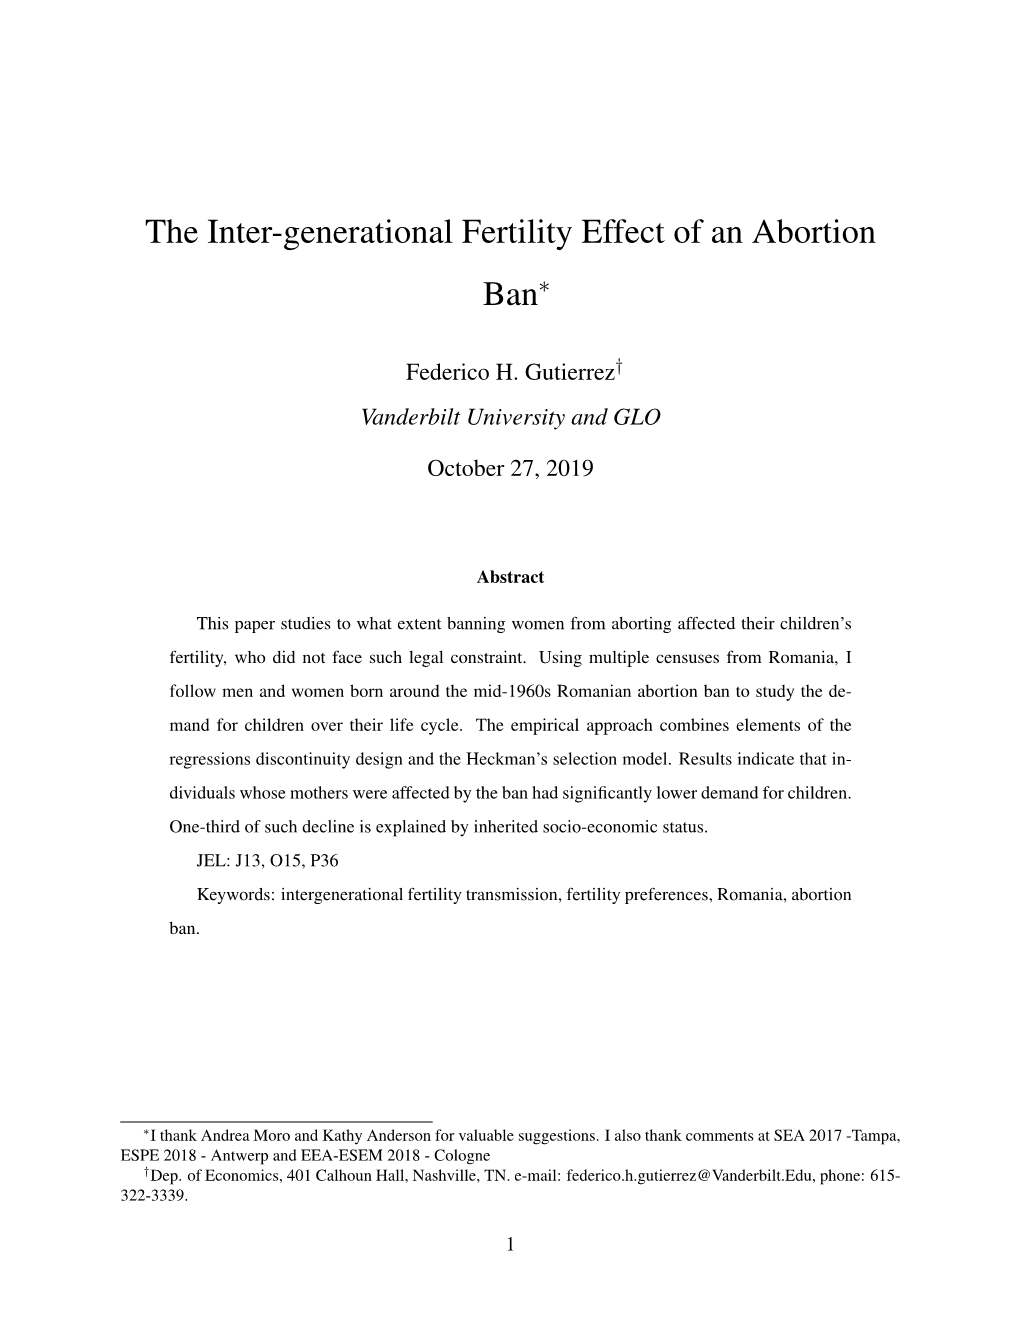 The Inter-Generational Fertility Effect of an Abortion Ban∗